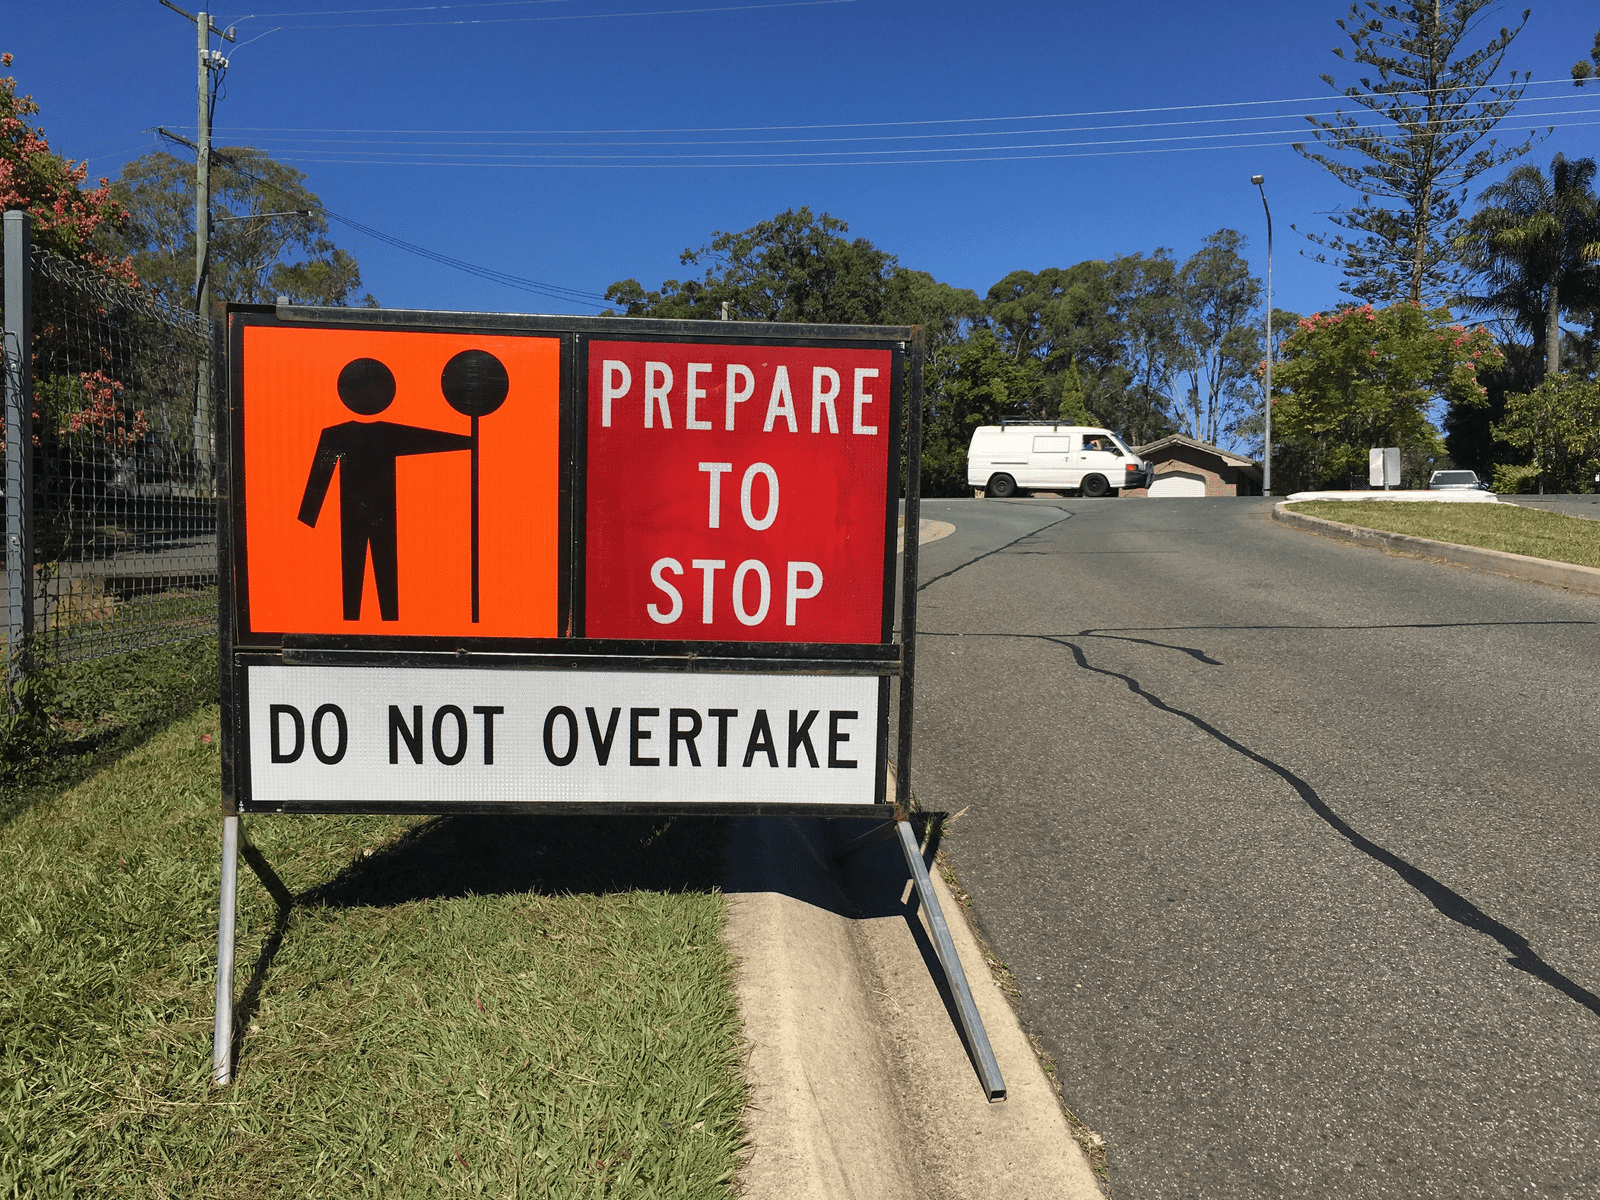 A Traffic sign that says prepare to stop and don't overtake.